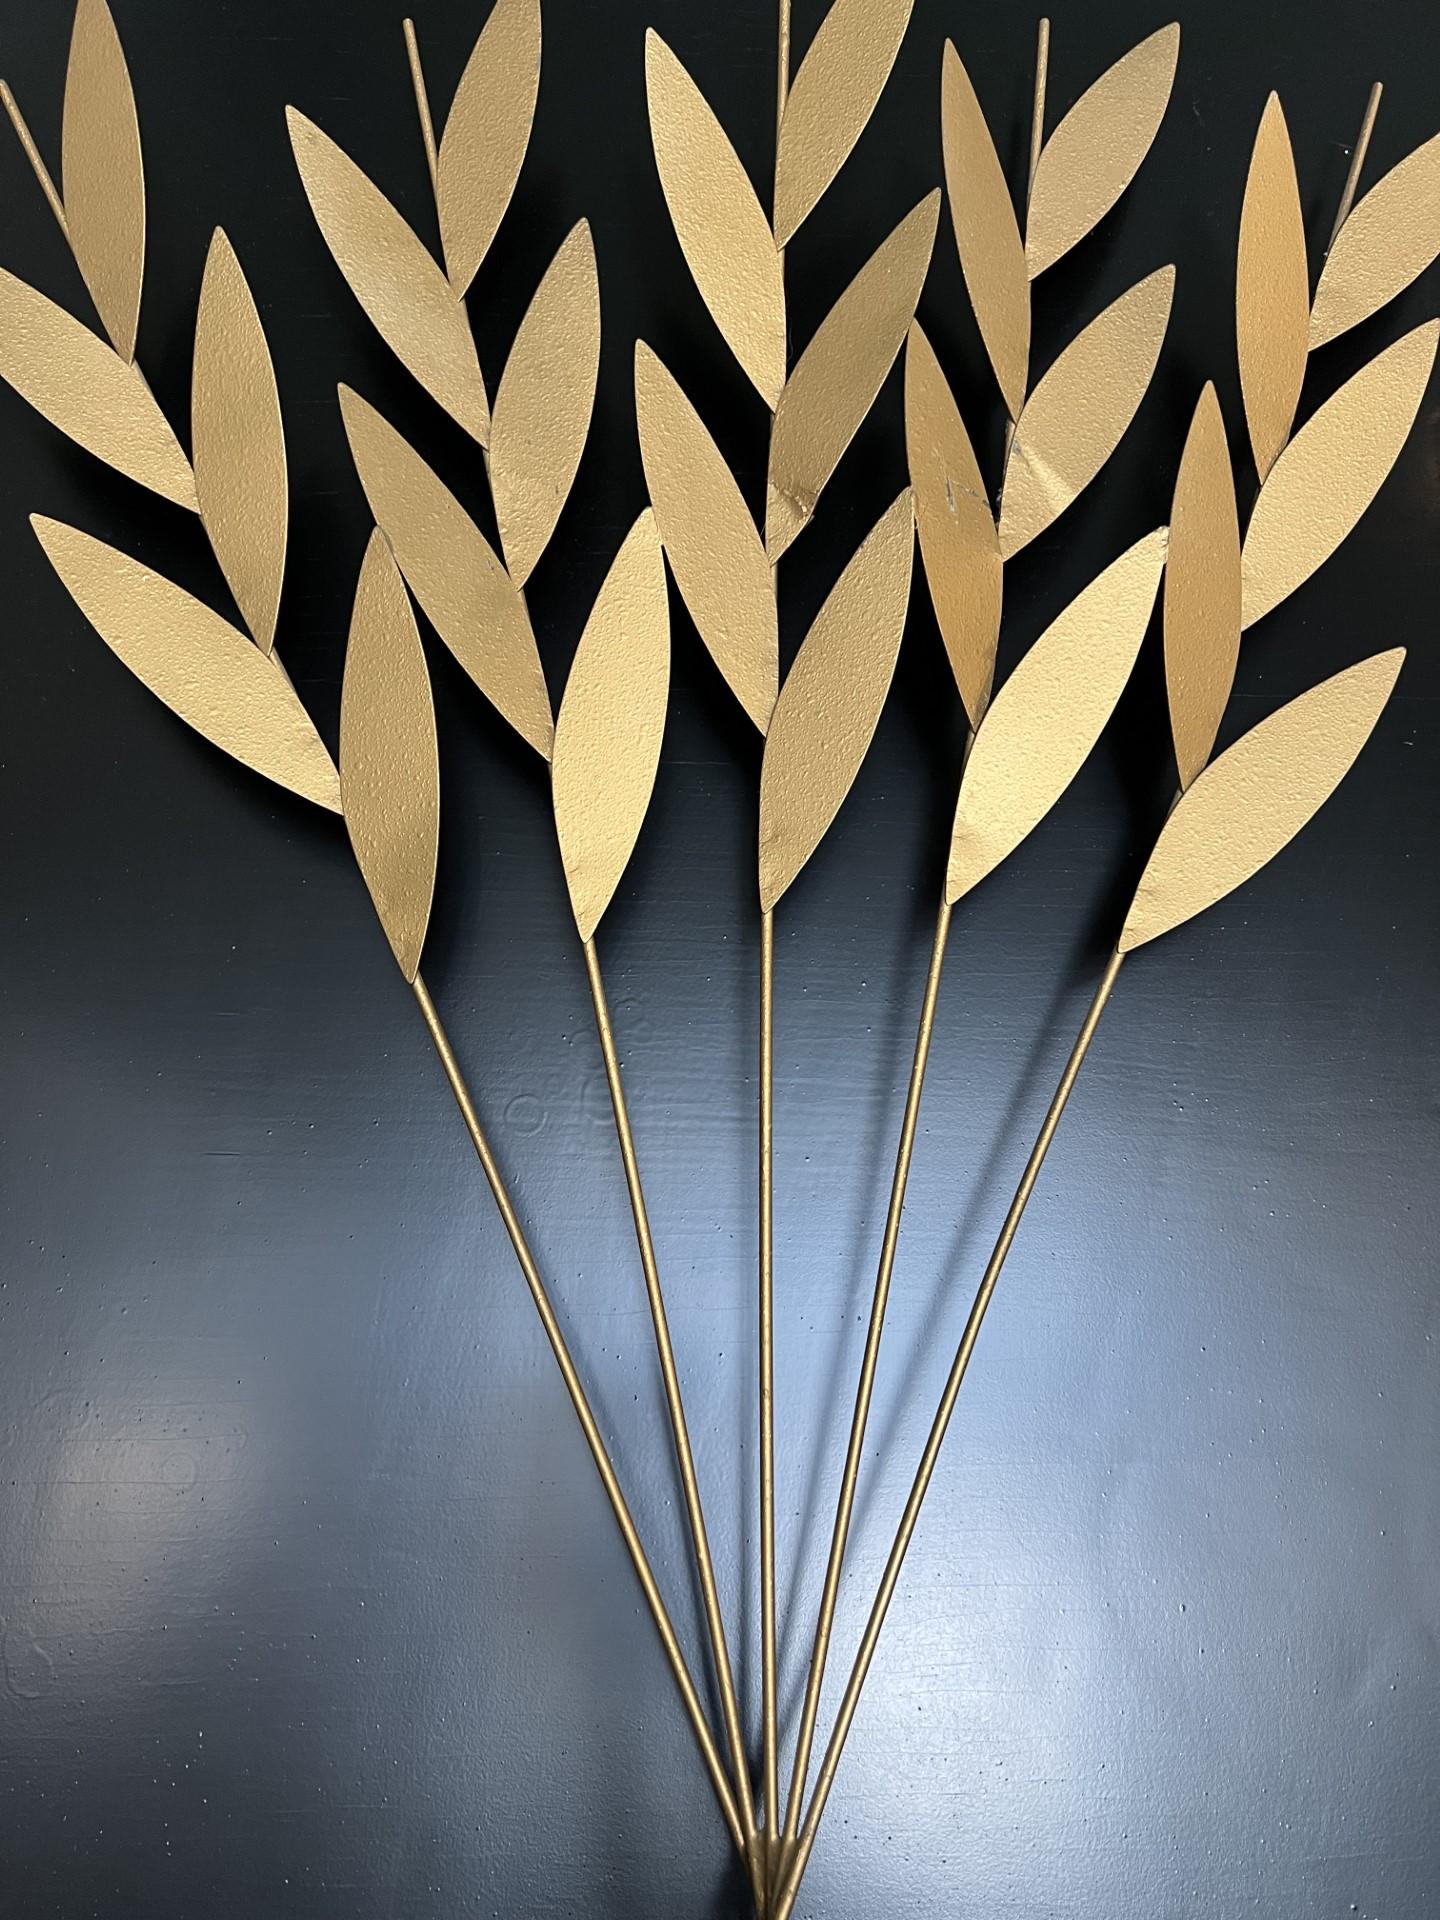 Set of 2 midcentury Wall Panels in Brass and Olive Branches from circa 1960. In Good condition - please refer to photos attached for reference.